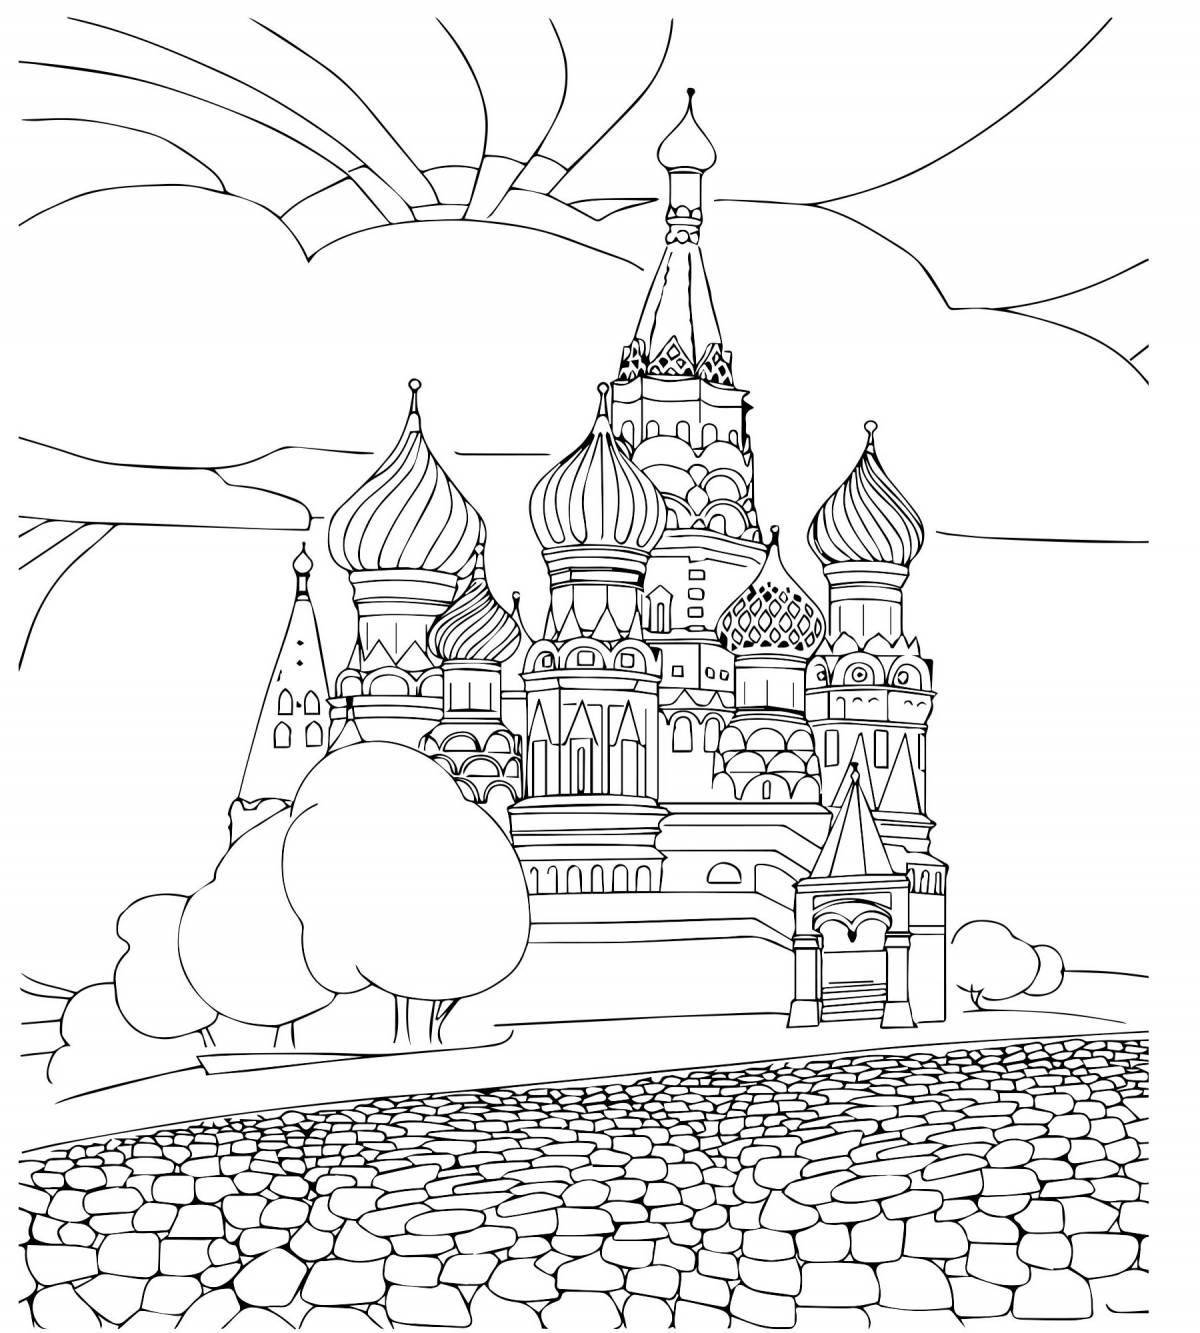 Colouring page stunning st basil's cathedral